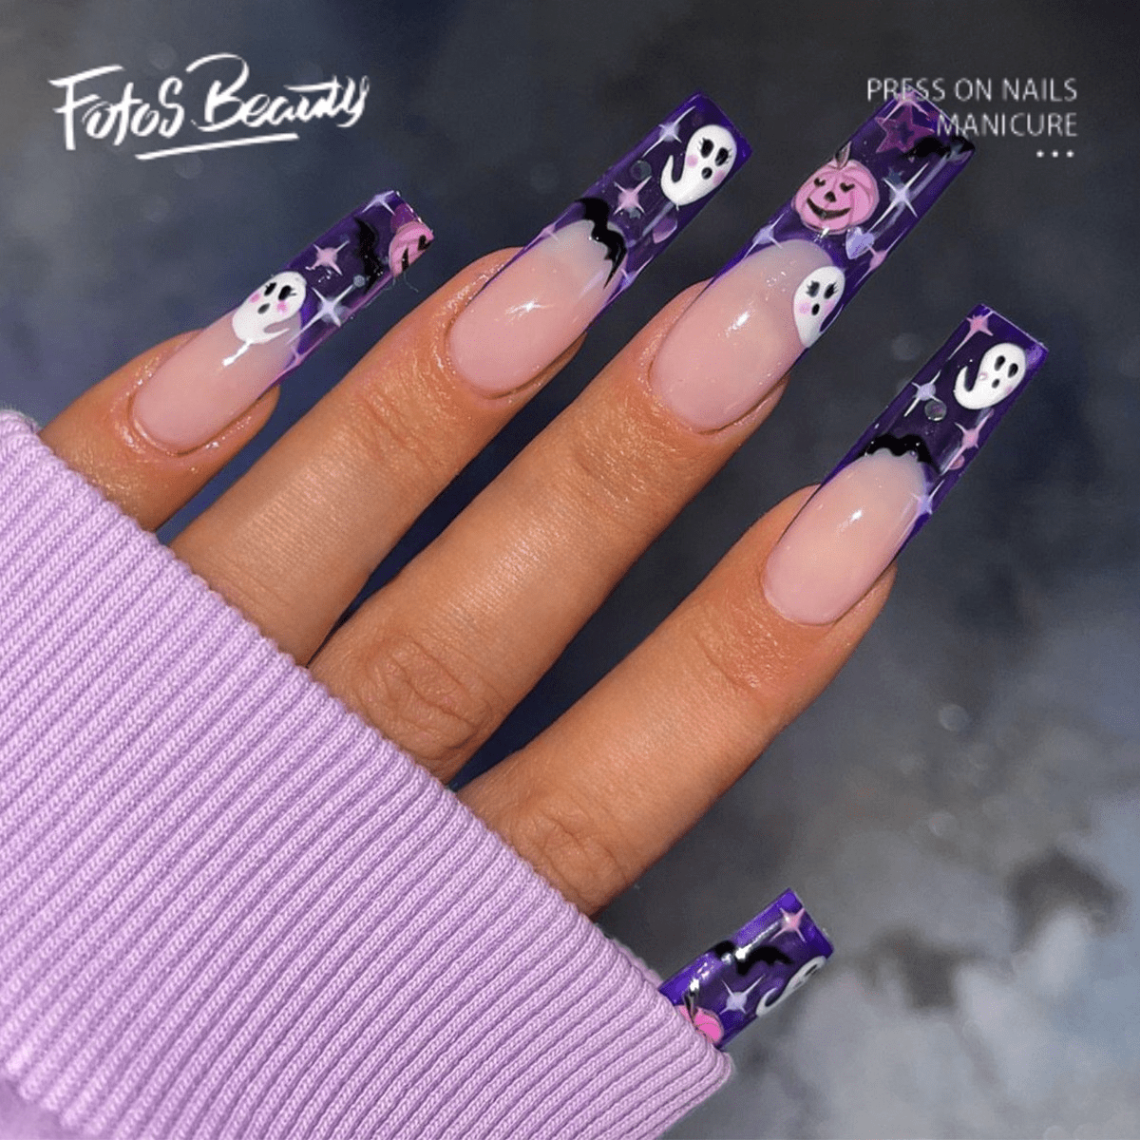 2023 coffin nail designs Bulan 5 Fofosbeauty  pcs Press-on Acrylic False Nails, Nails Tips Designs  ,Long Coffin French Ghost Purple